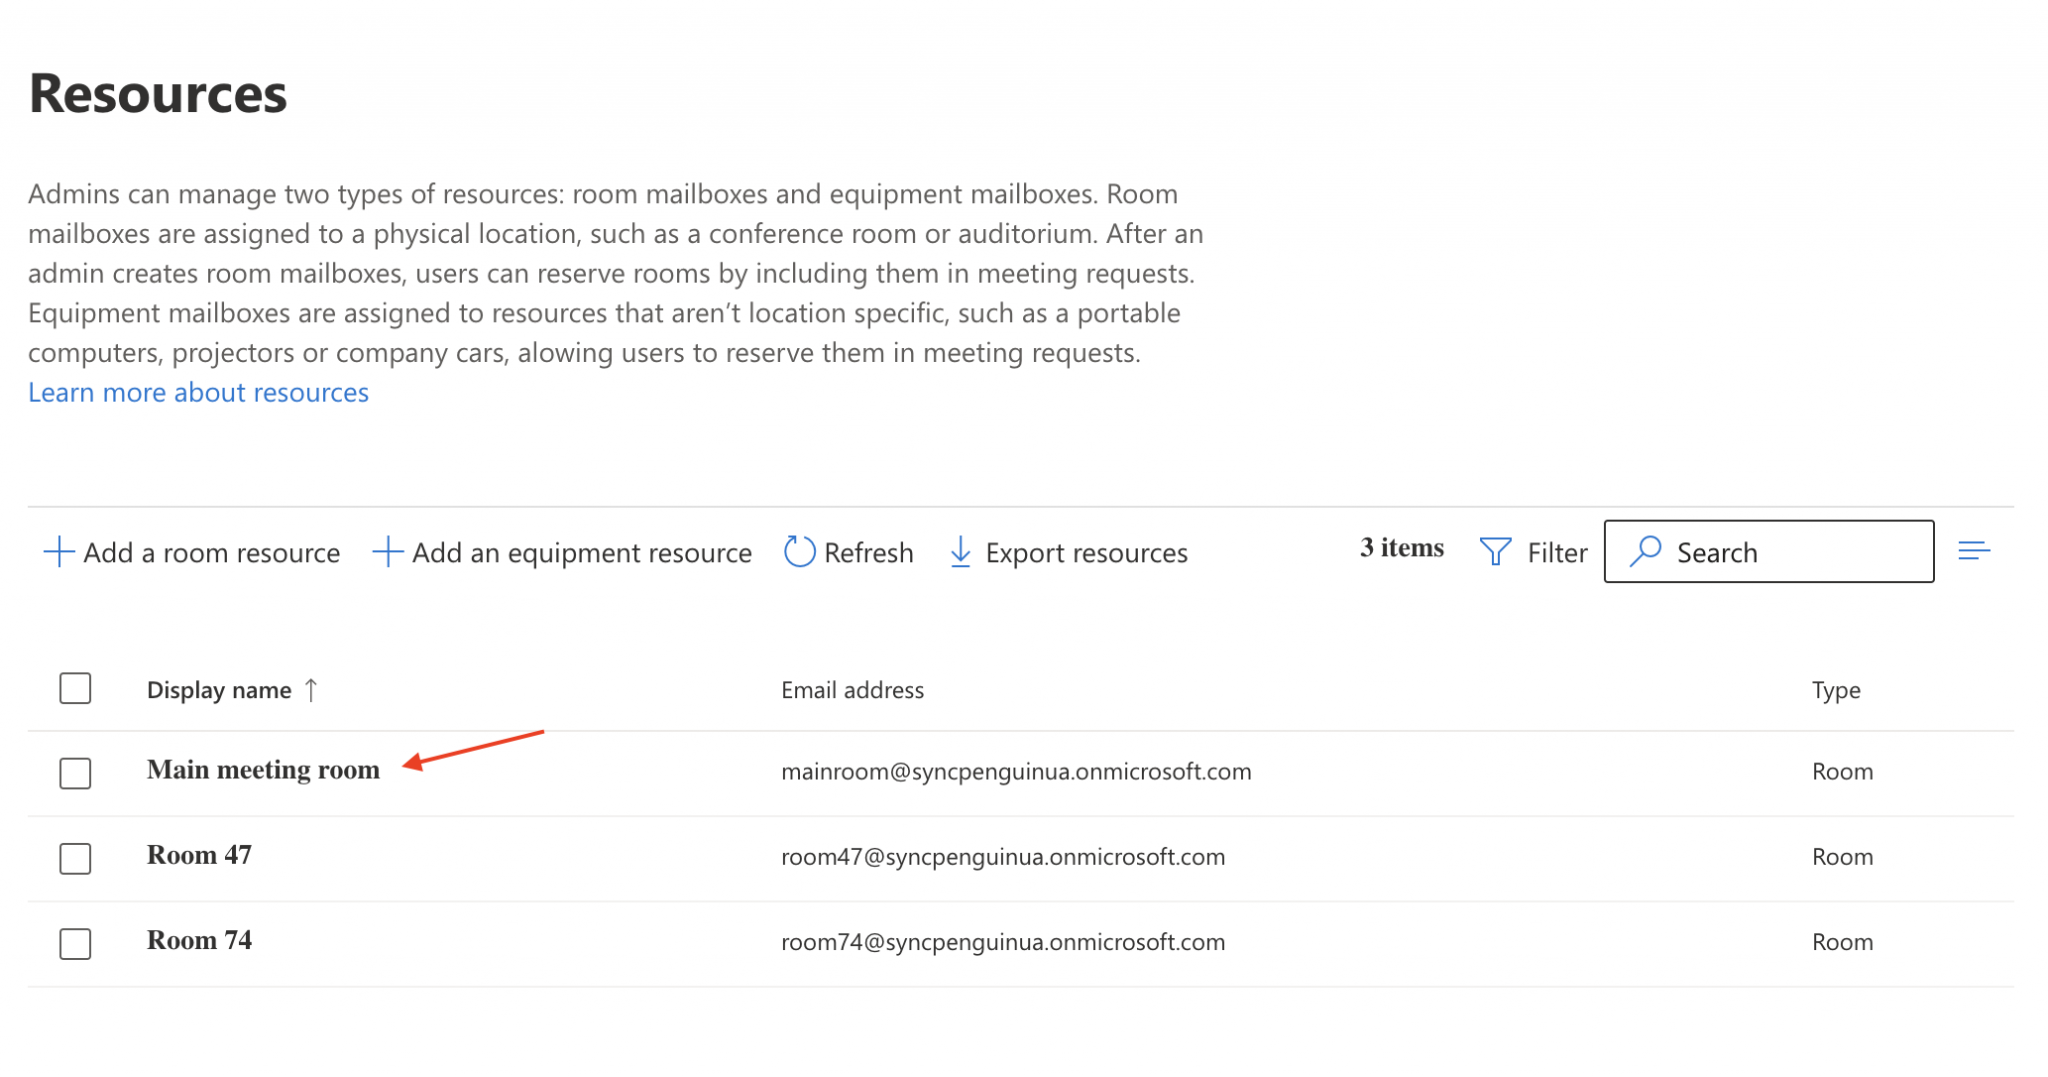 How to enable delegate access to an Office 365 or Exchange room or